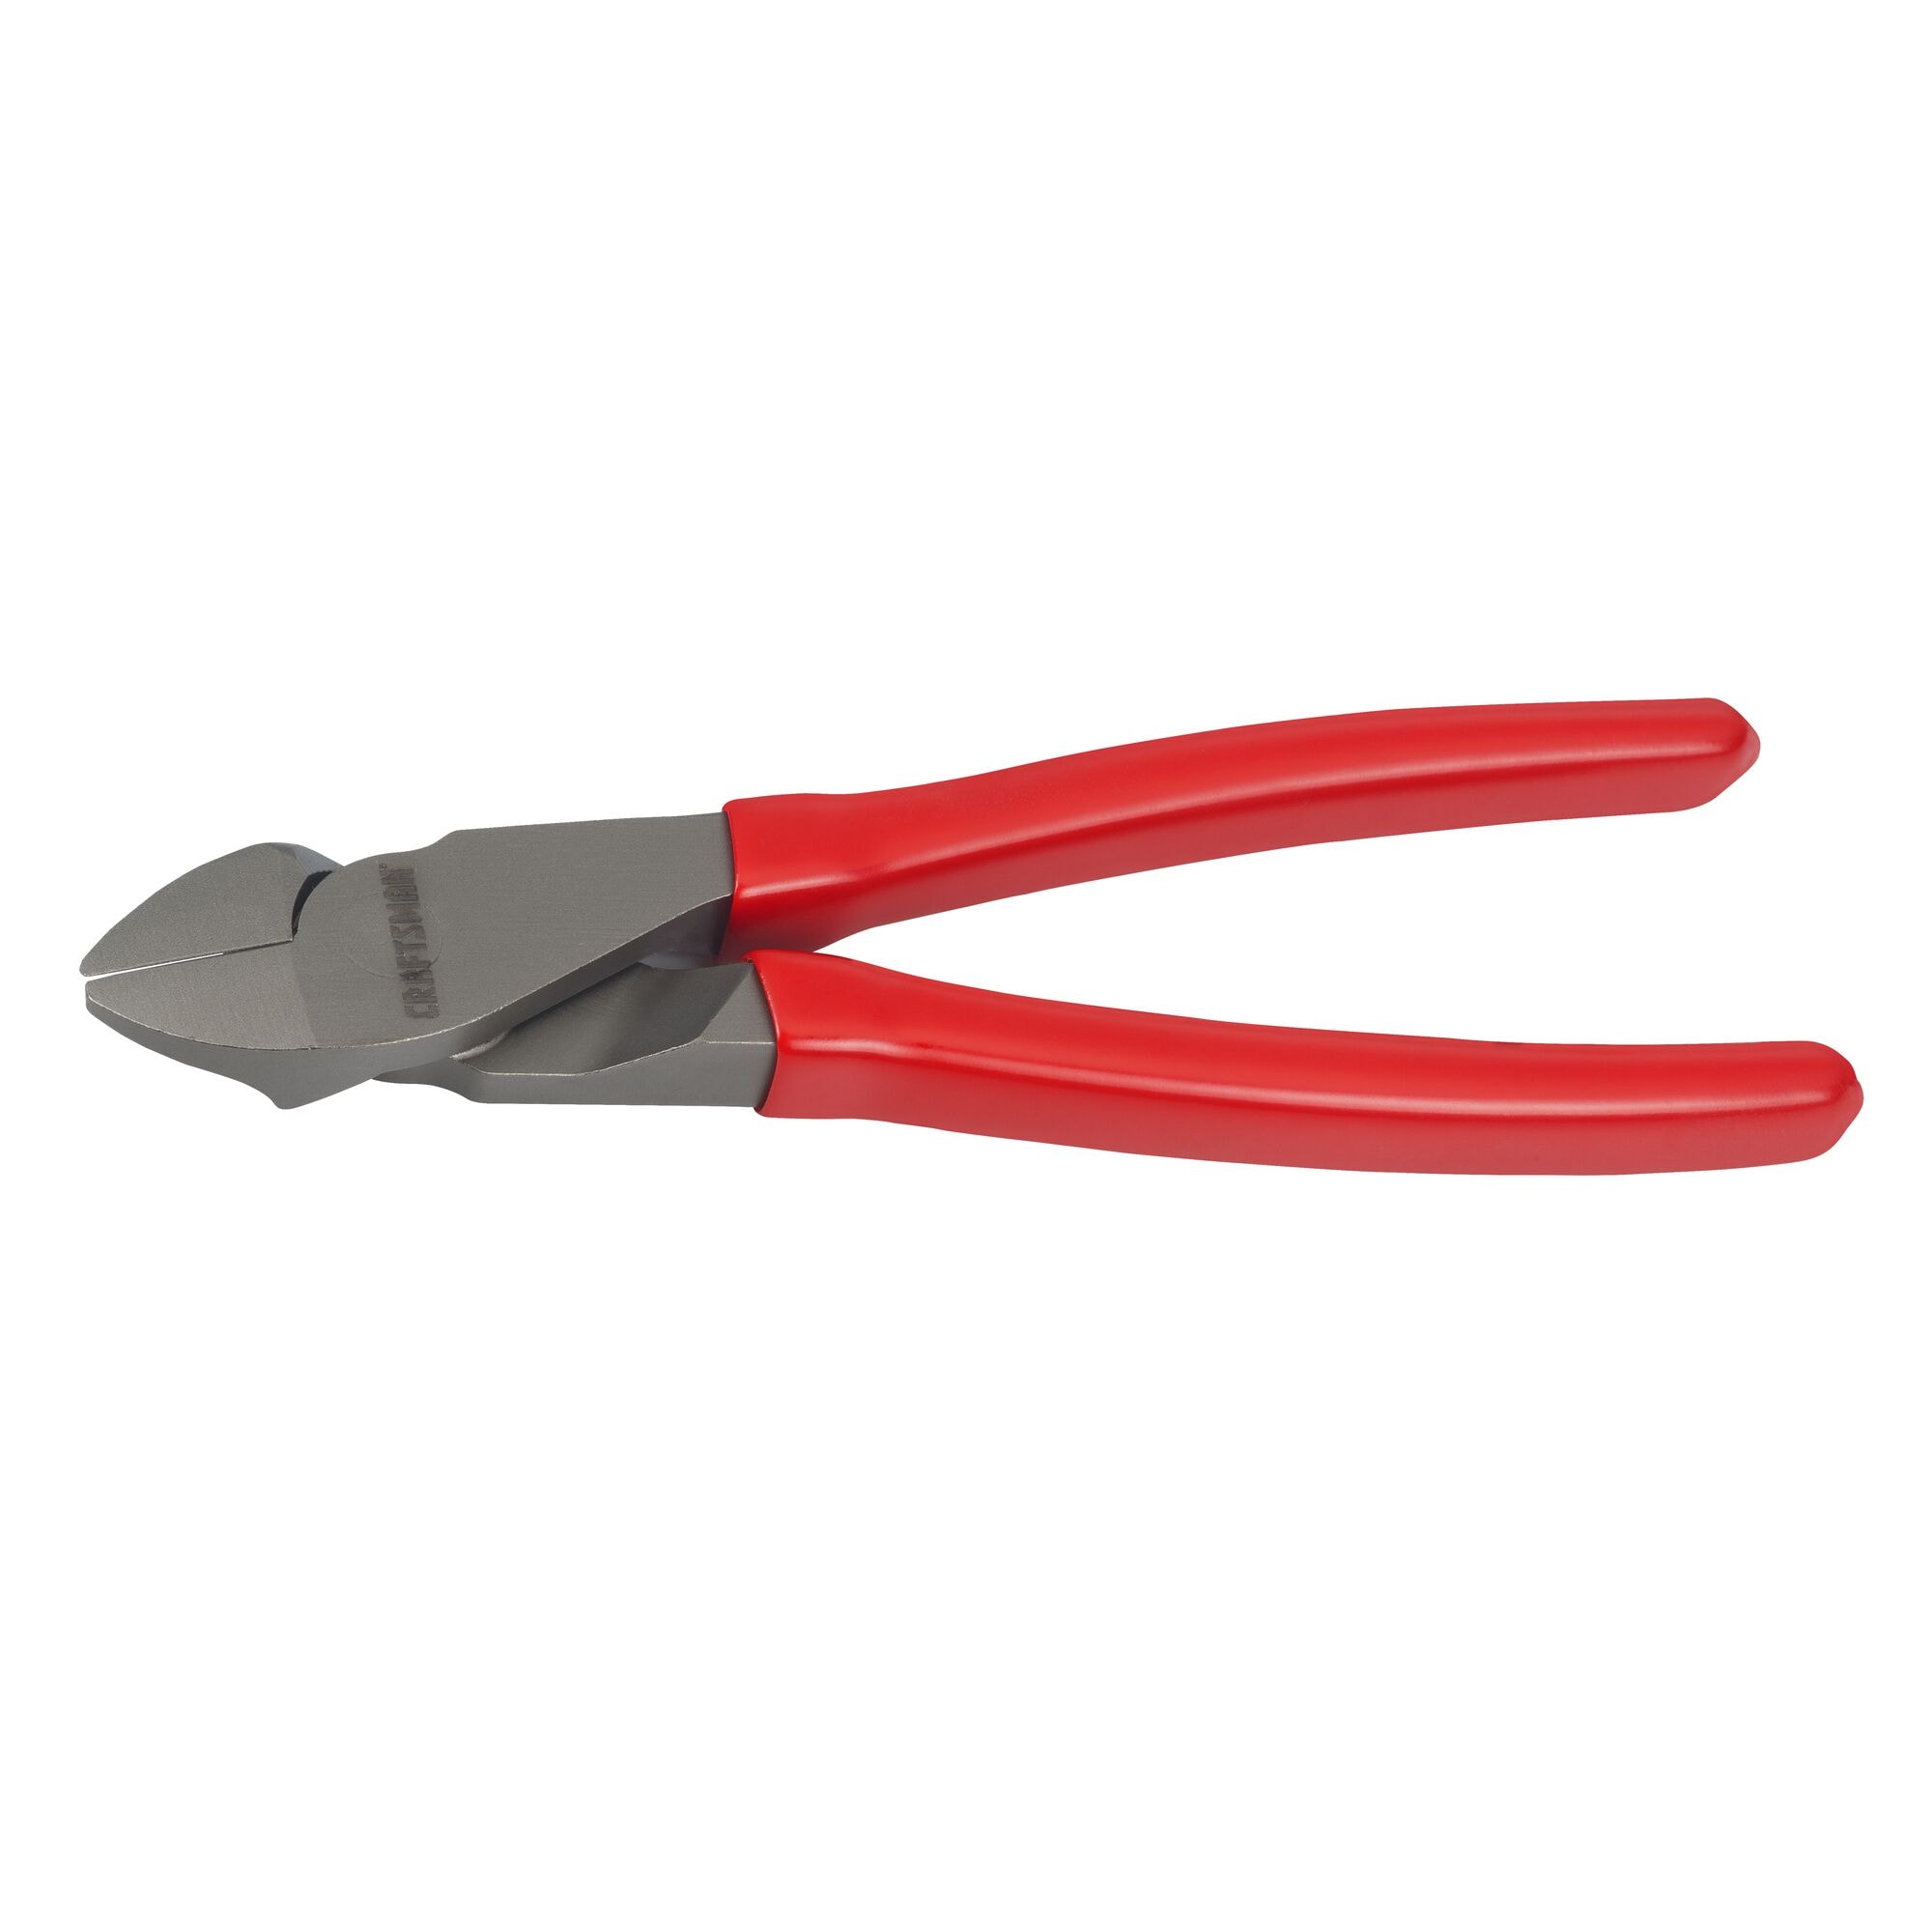 CRAFTSMAN 7-in Diagonal Cutting Pliers with Wire Cutter in the